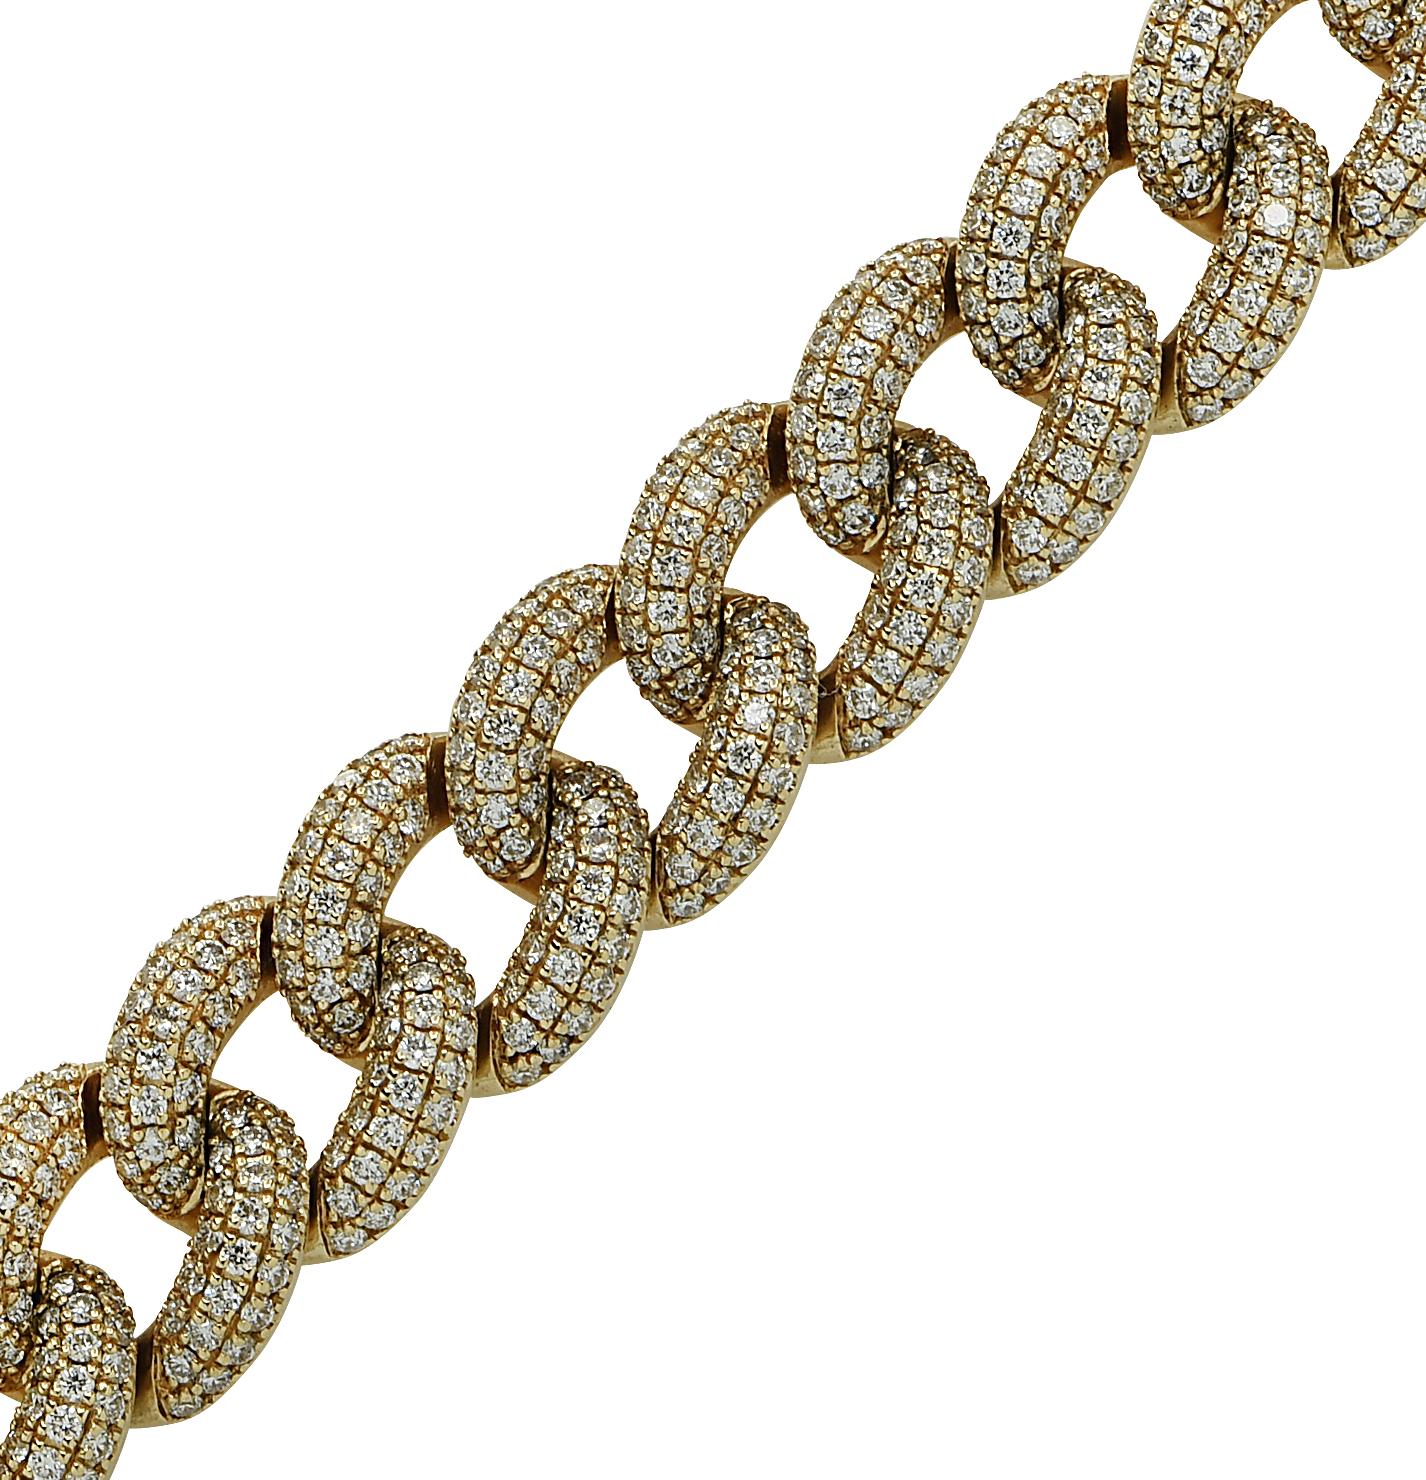 Exquisite Vivid Diamonds18 Karat yellow gold Cuban link bracelet featuring 5.46 carats of round brilliant cut diamonds, F-G color, VS clarity. Each diamond was carefully selected, perfectly matched, and set in a seamless eternity of diamonds,